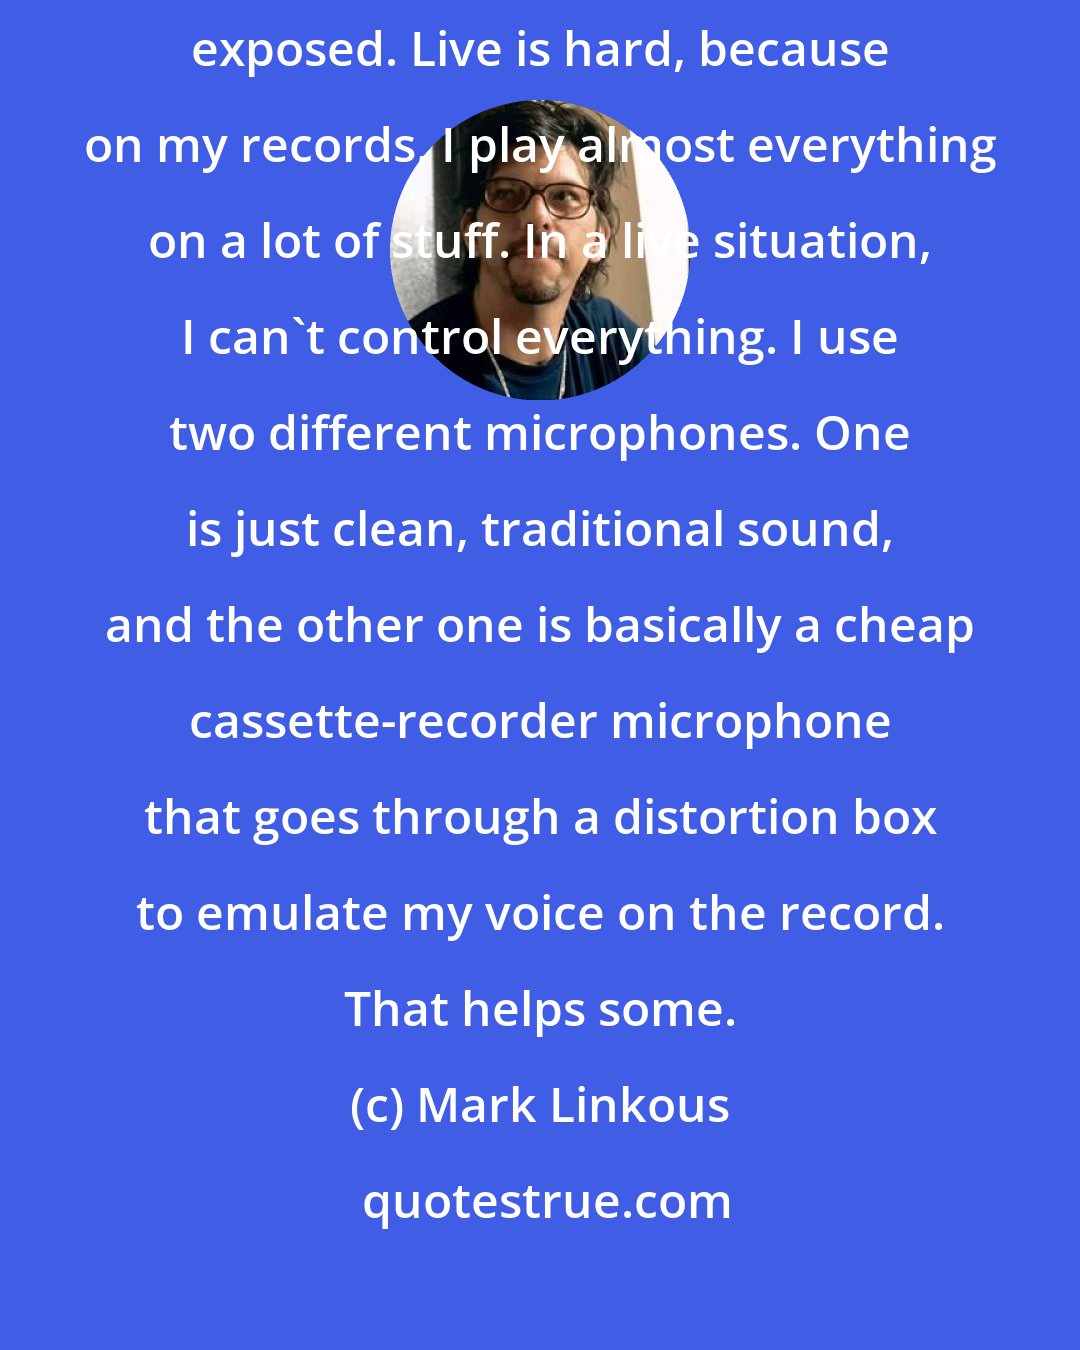 Mark Linkous: I hate the sound of my own voice. It's just up there, sort of naked and exposed. Live is hard, because on my records, I play almost everything on a lot of stuff. In a live situation, I can't control everything. I use two different microphones. One is just clean, traditional sound, and the other one is basically a cheap cassette-recorder microphone that goes through a distortion box to emulate my voice on the record. That helps some.